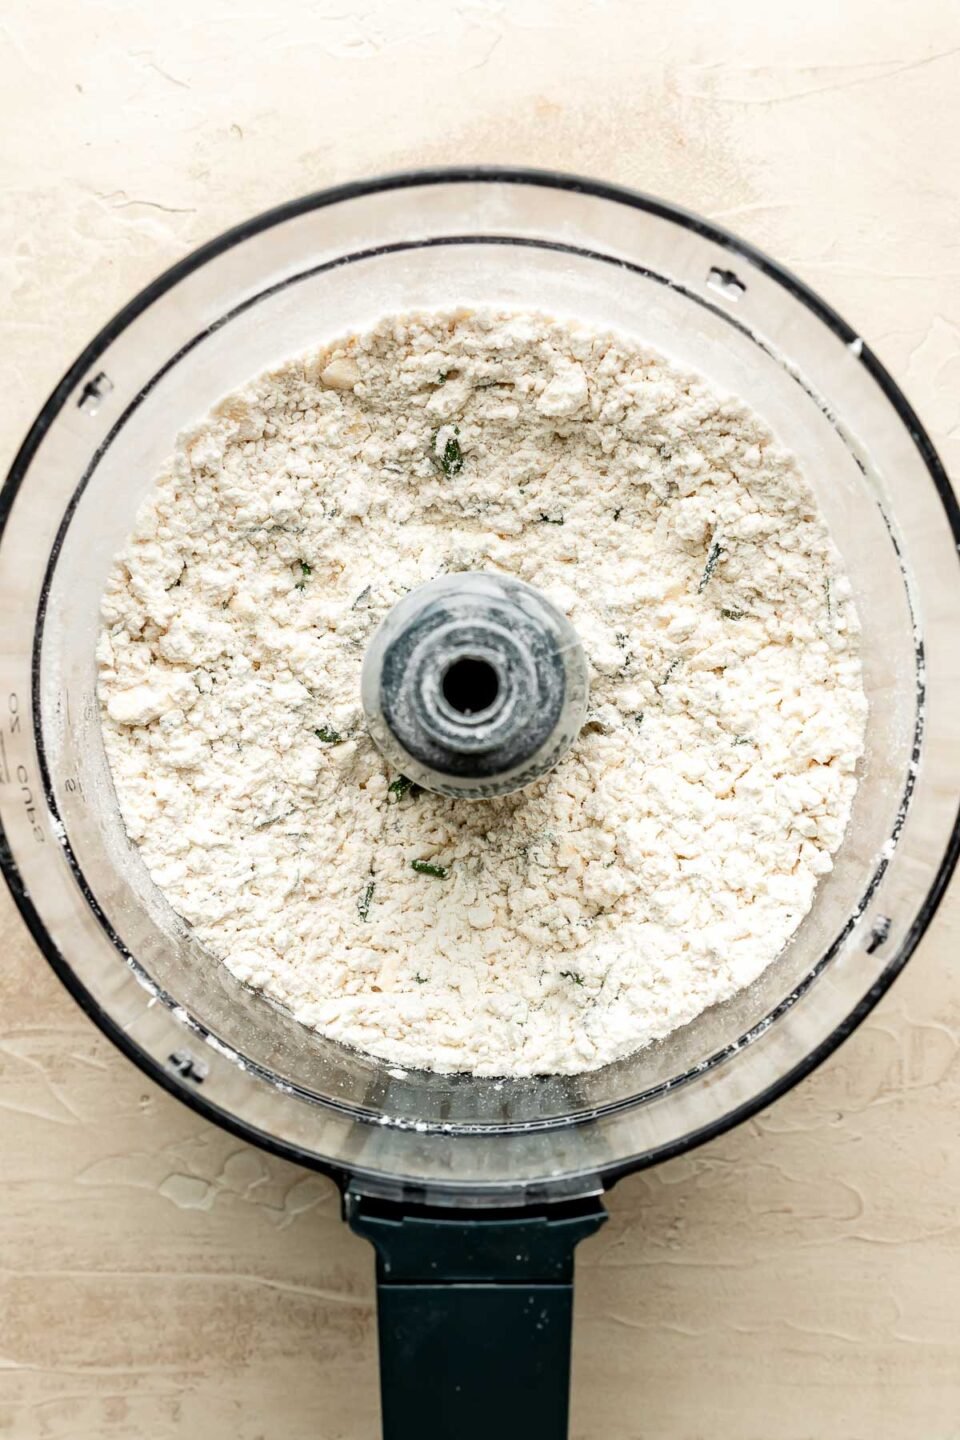 An overhead shot of flour and chopped herbs in the bowl of a food processor atop an off-white surface.